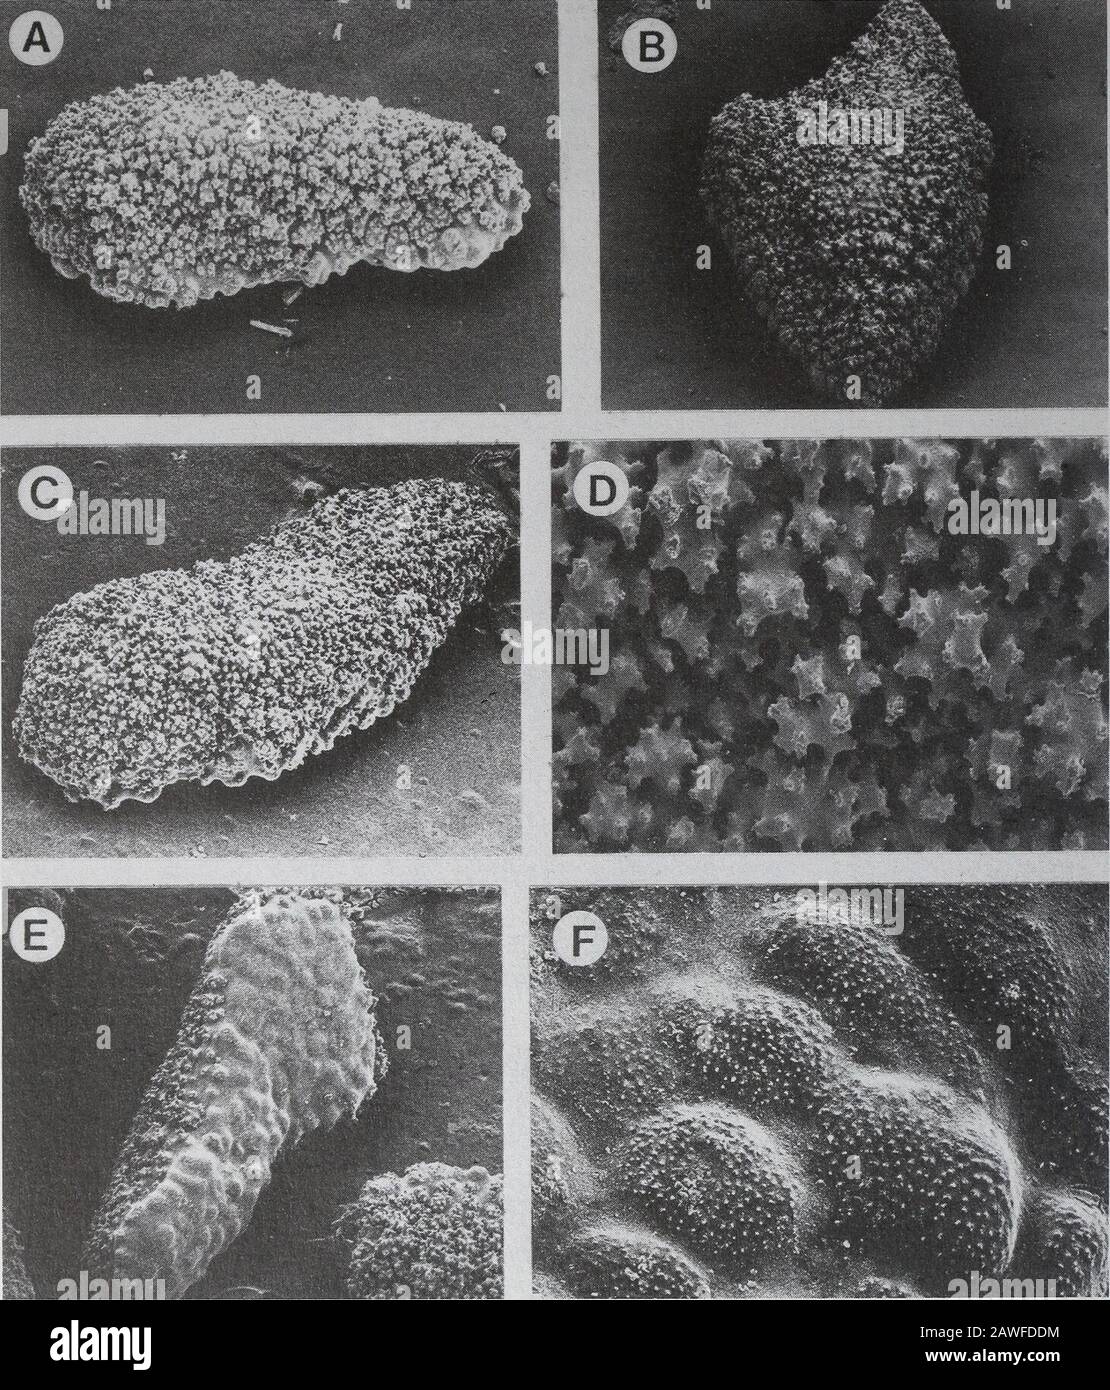 Annals of the South African MuseumAnnale van die Suid-Afrikaanse Museum . Fig. 4. Scleranthelia thomsoni Williams, 1987a. A. An entire colony; scalebar =10 mm. B. A single anthostele with anthocodia retracted, 12 mm length.C. Three anthocodial sclerites. D. Four sclerites from the spiculiferous mesoglealmatrix contained in the basal interior of the polyps. C-D. Scale bar = 0,2 mm.E. Five plate-like sclerites from anthostelar wall, sclerite at left shows outer surface,other four sclerites show inner surface; scale bar = 0,5 mm. 264 ANNALS OF THE SOUTH AFRICAN MUSEUM. Fig. 5. Scanning electron m Stock Photo